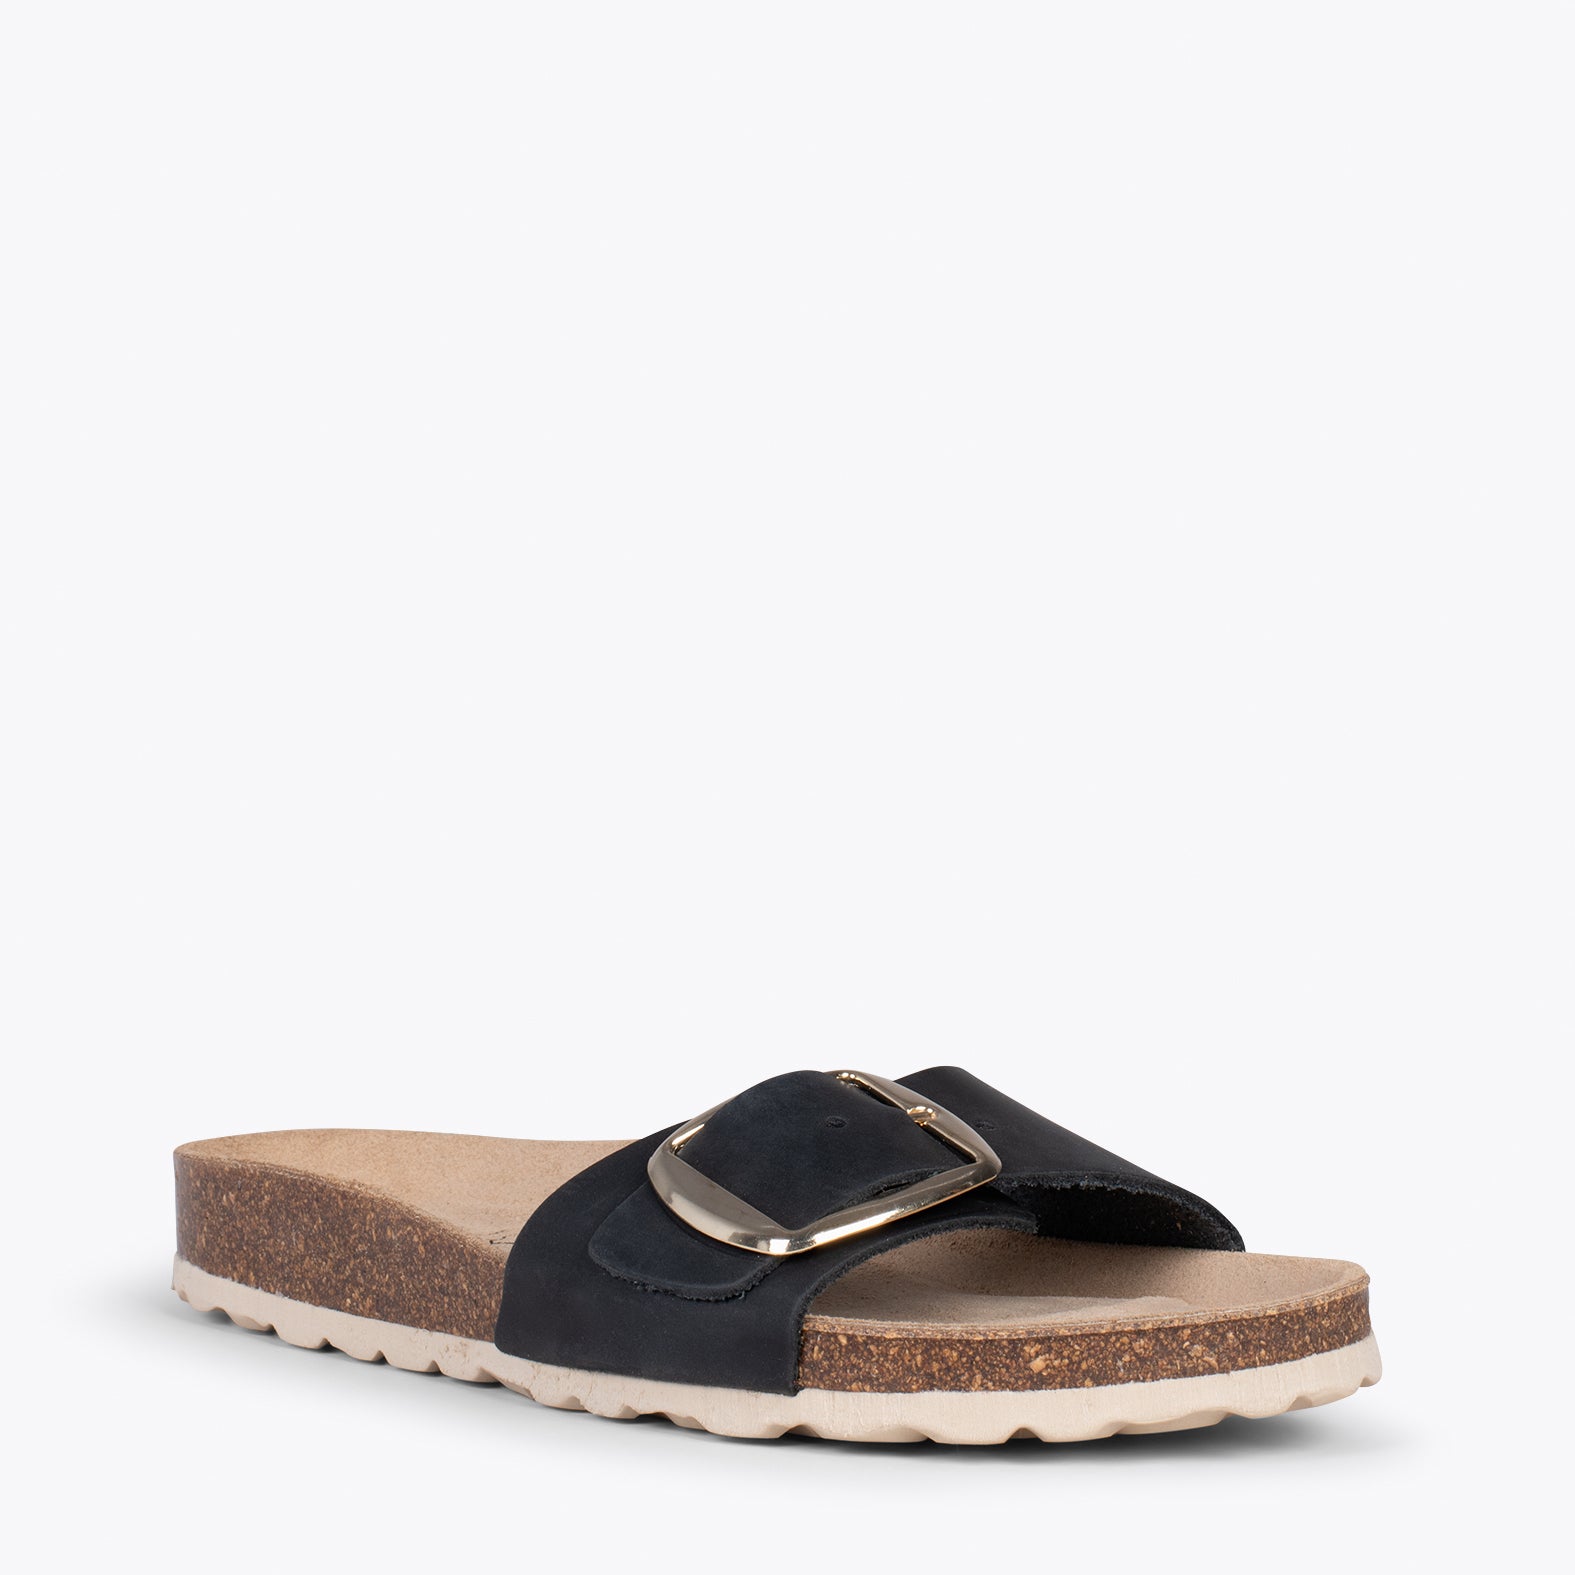 CLAVEL – BLACK leather slides with buckle